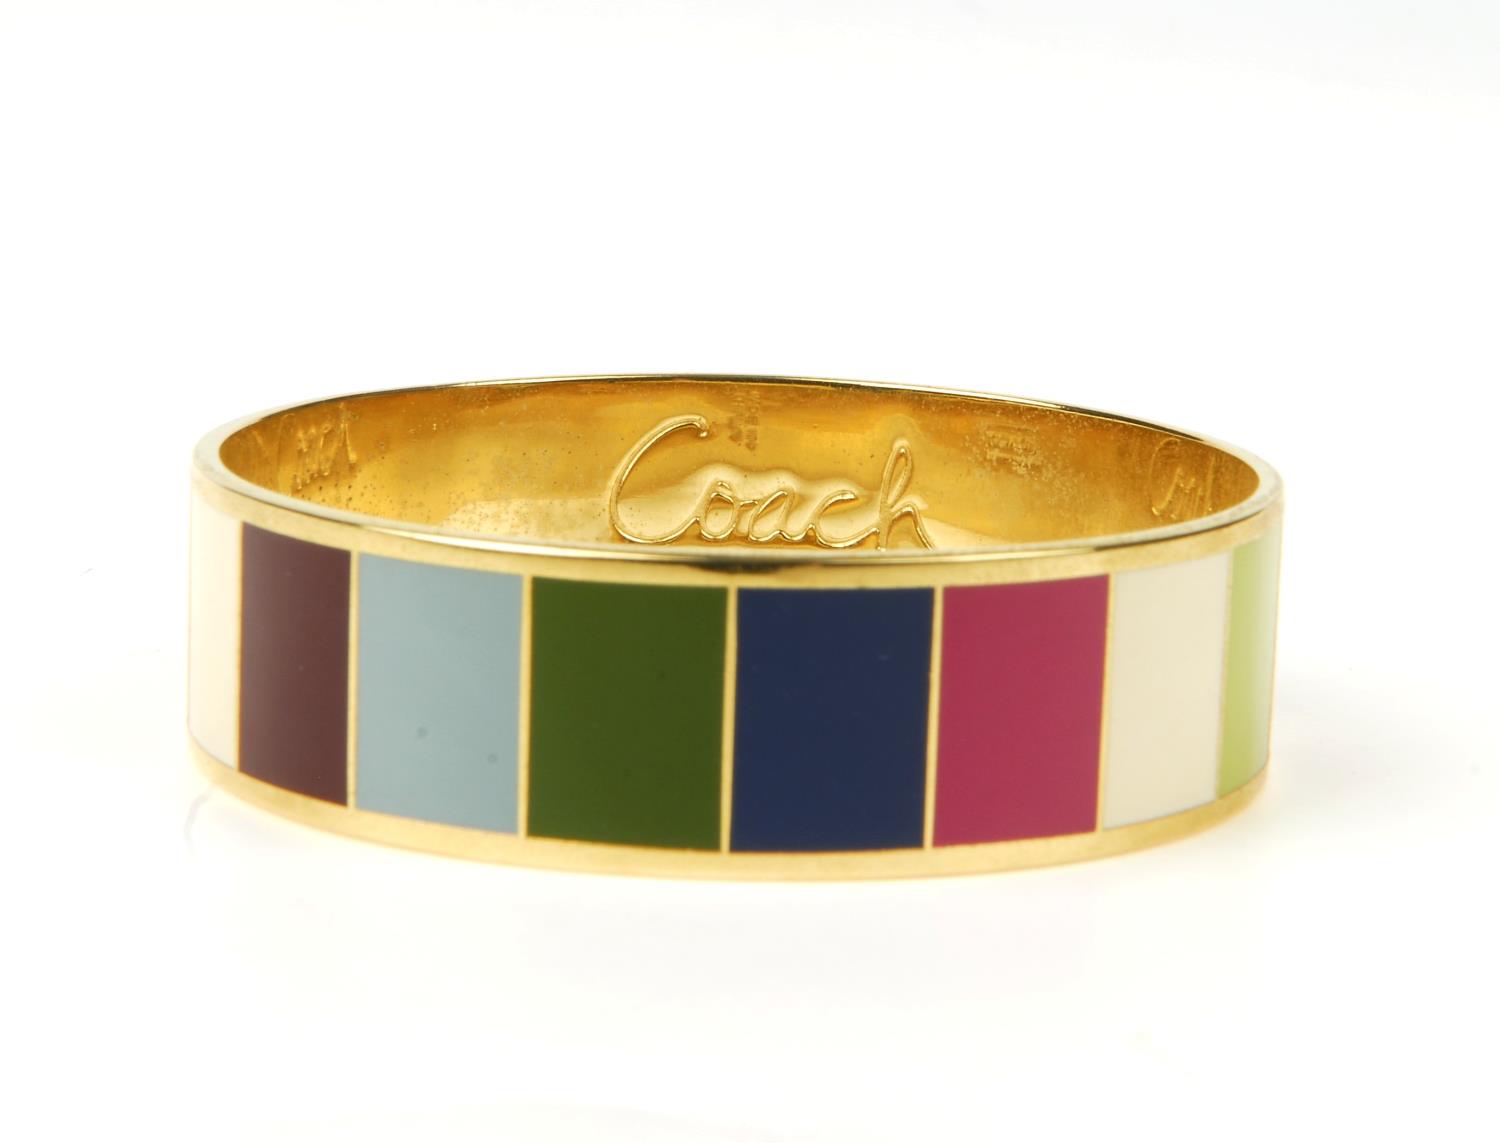 COACH - a Legacy striped bangle. The gold-tone bangle featuring multicoloured striped enamel inlay - Image 9 of 9